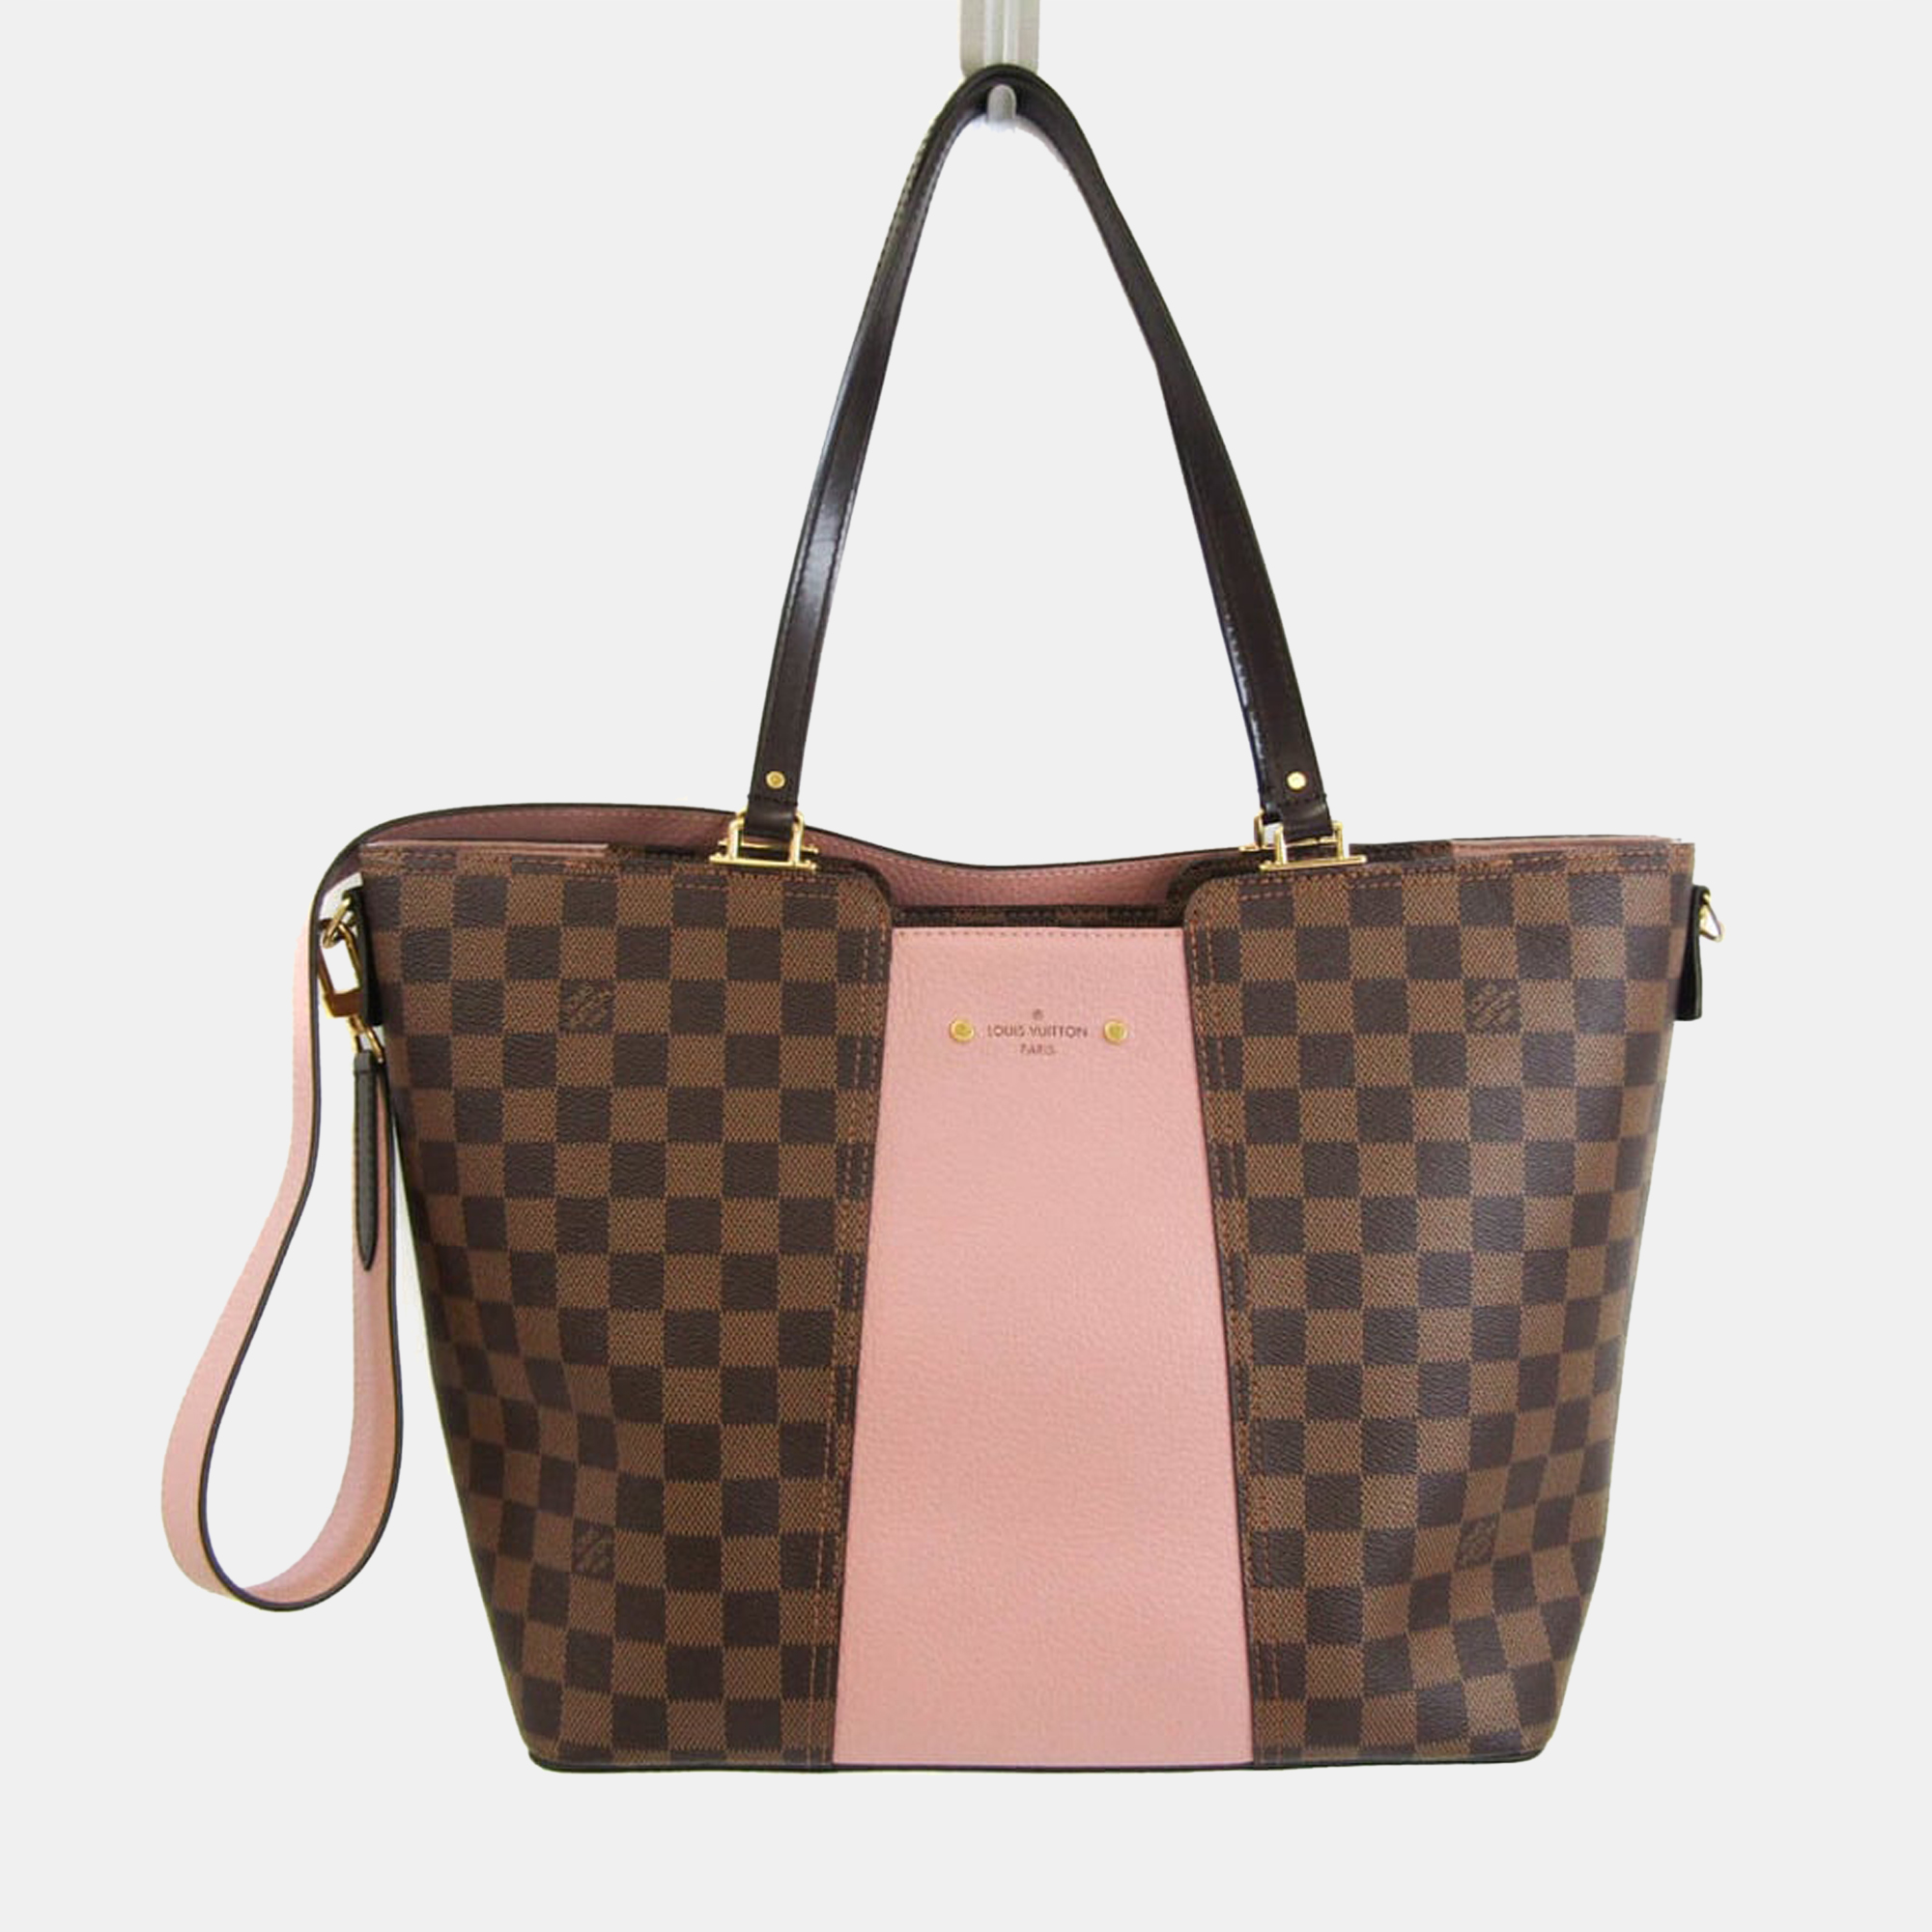 Louis Vuitton Jersey Tote in Magnolia unboxing 